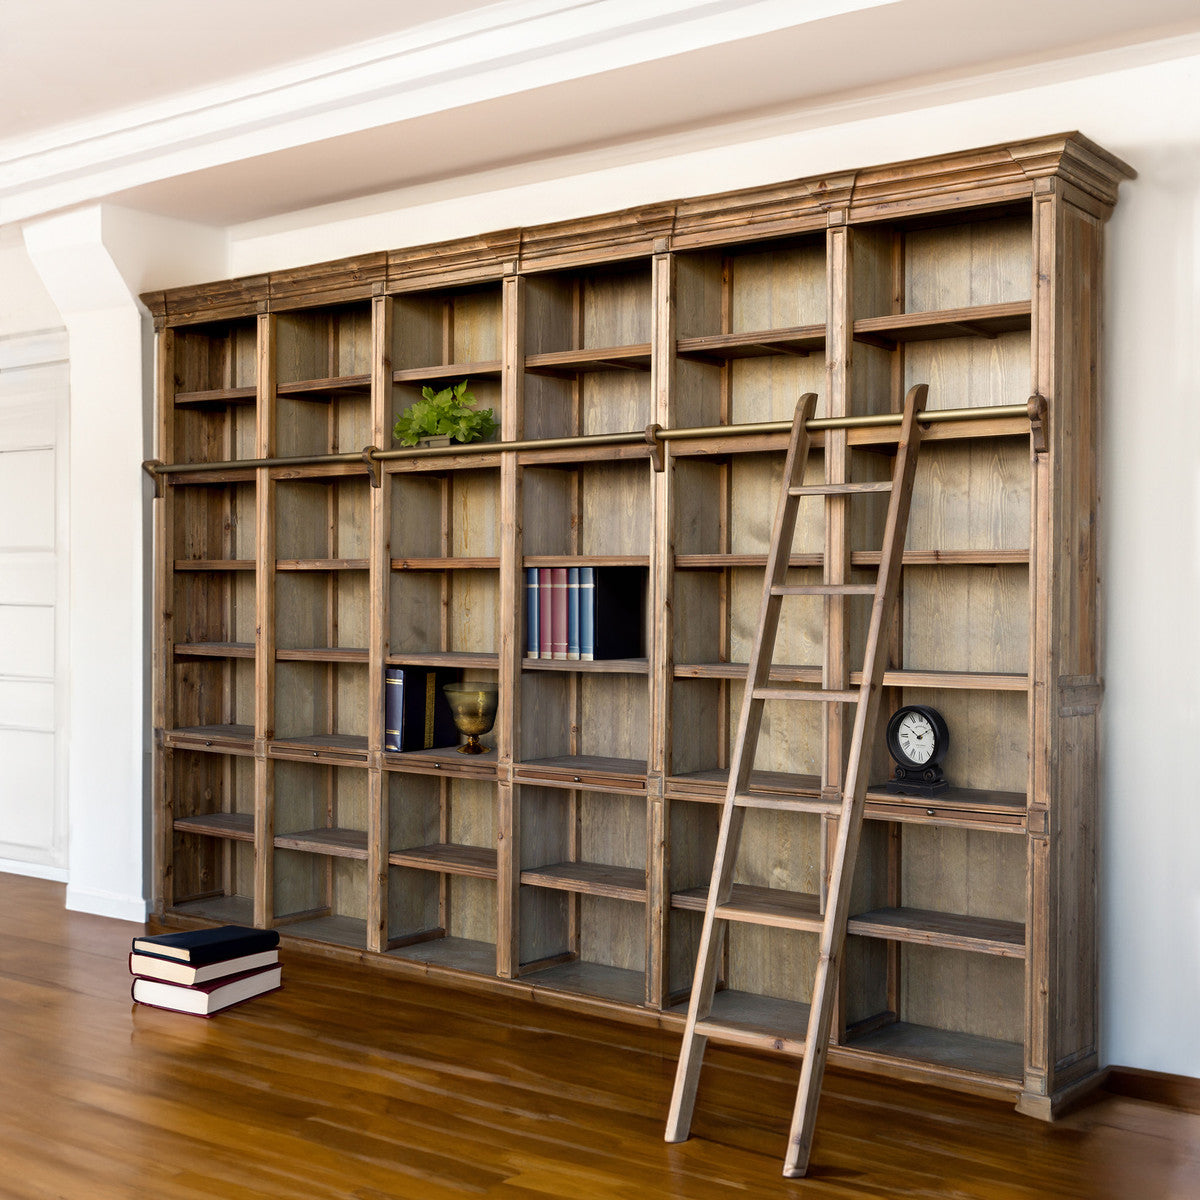 Vintage library shelves for sale. Wooden library shelves with ladder for sale.